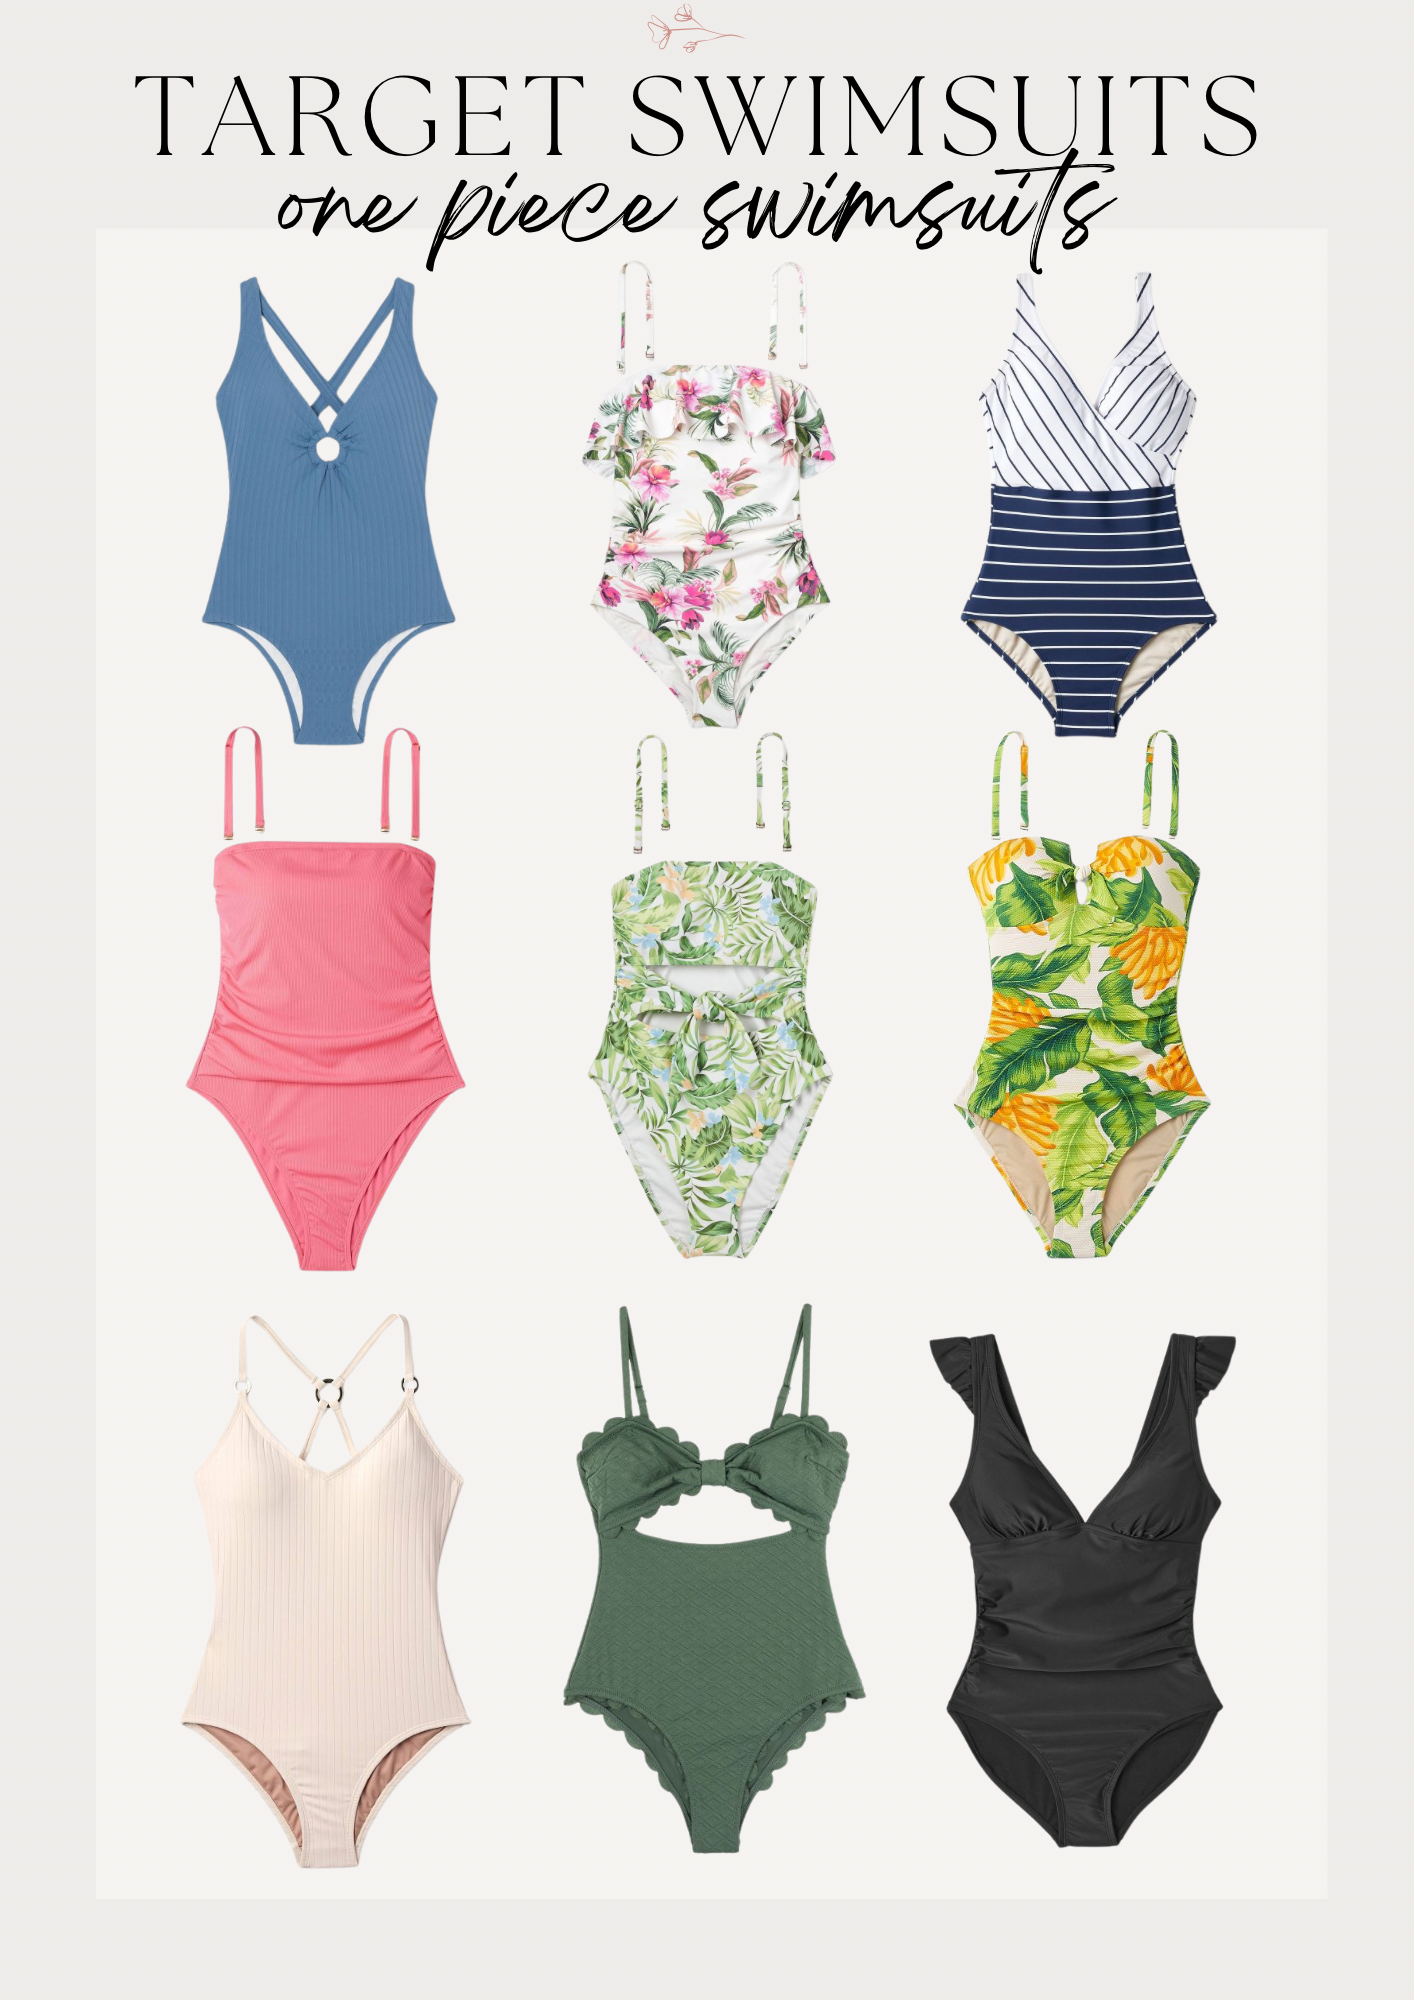 Target One Piece Swimsuits for Women - Affordable by Amanda